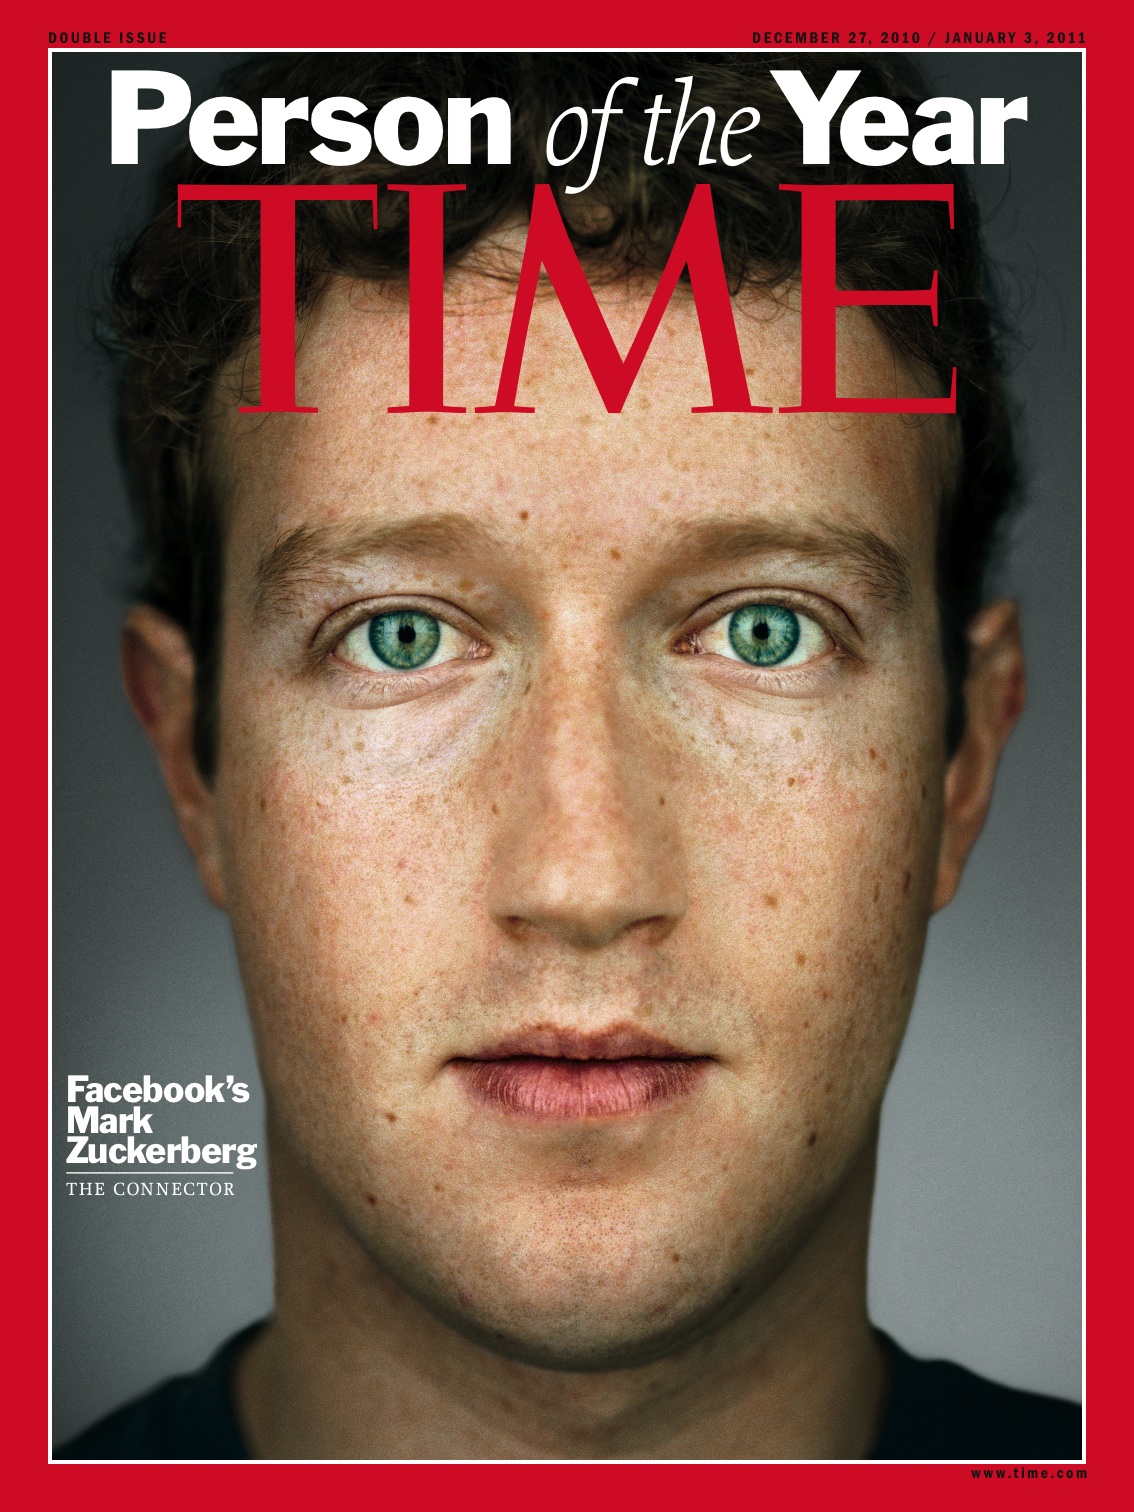 mark-zuckerberg-2010-time-person-of-the-year